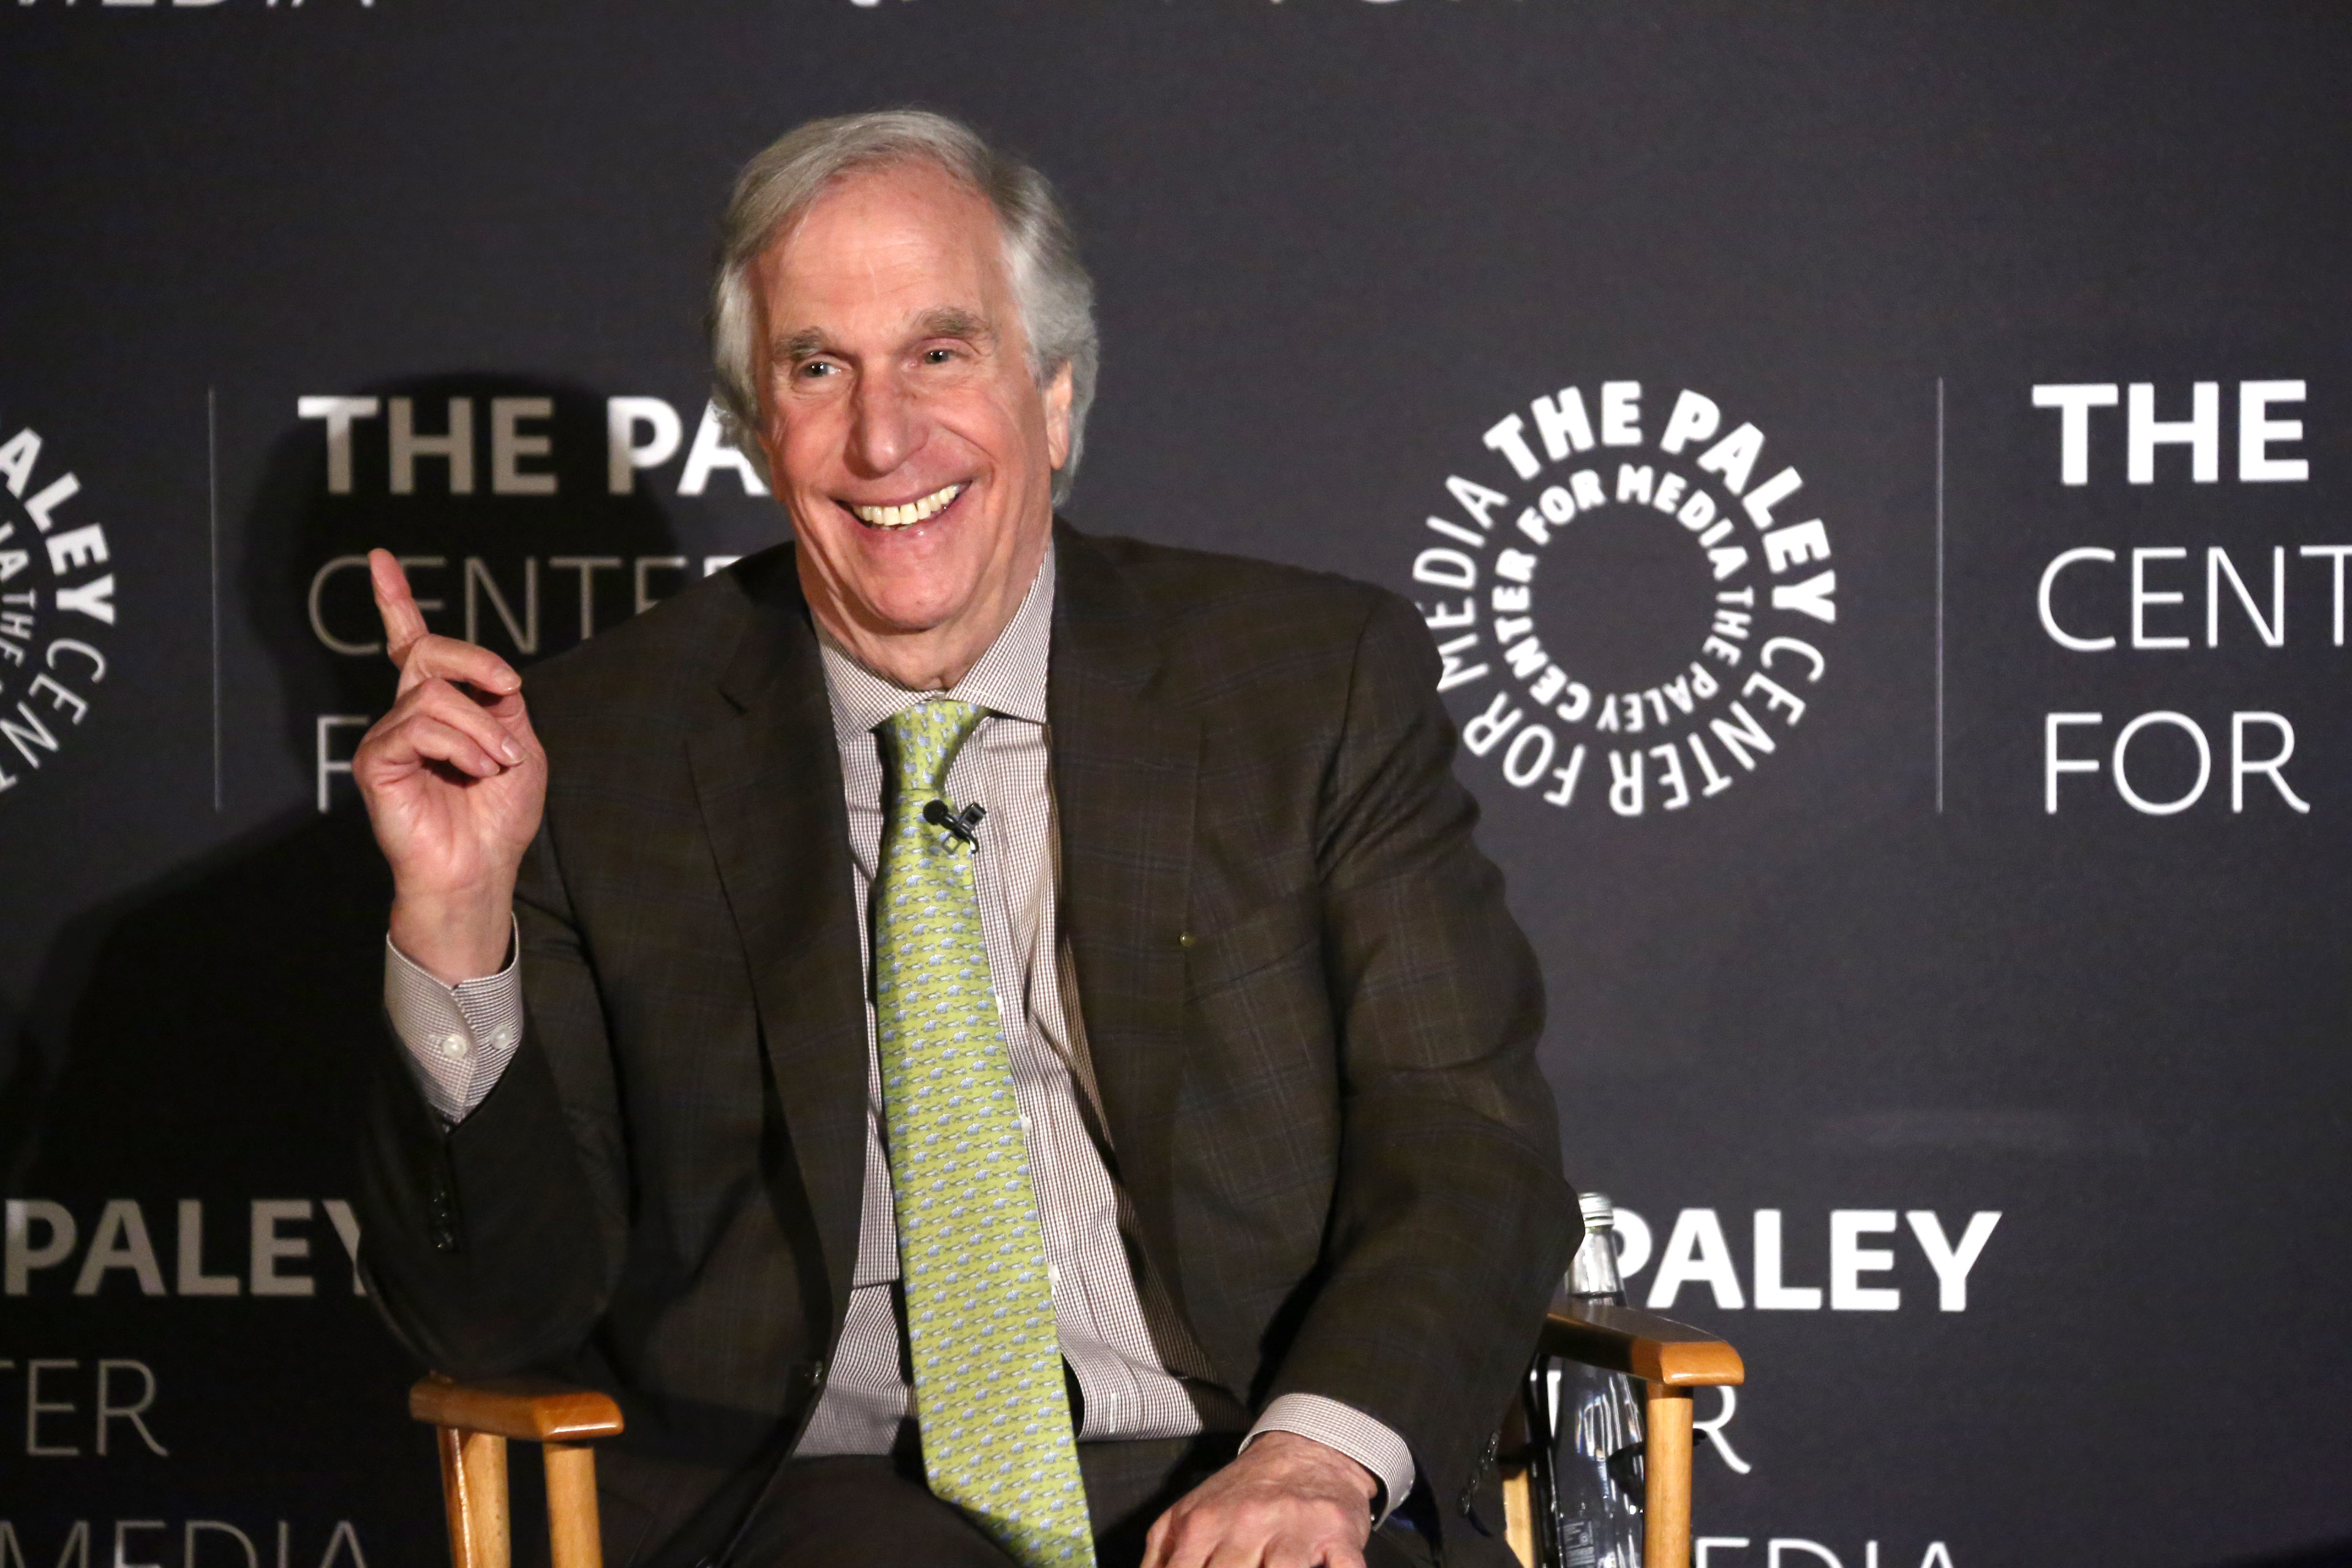 Henry Winkler attends The Paley Center For Media Presents An Evening With Henry Winkler in Beverly Hills, California, on February 12, 2020. | Source: Getty Images